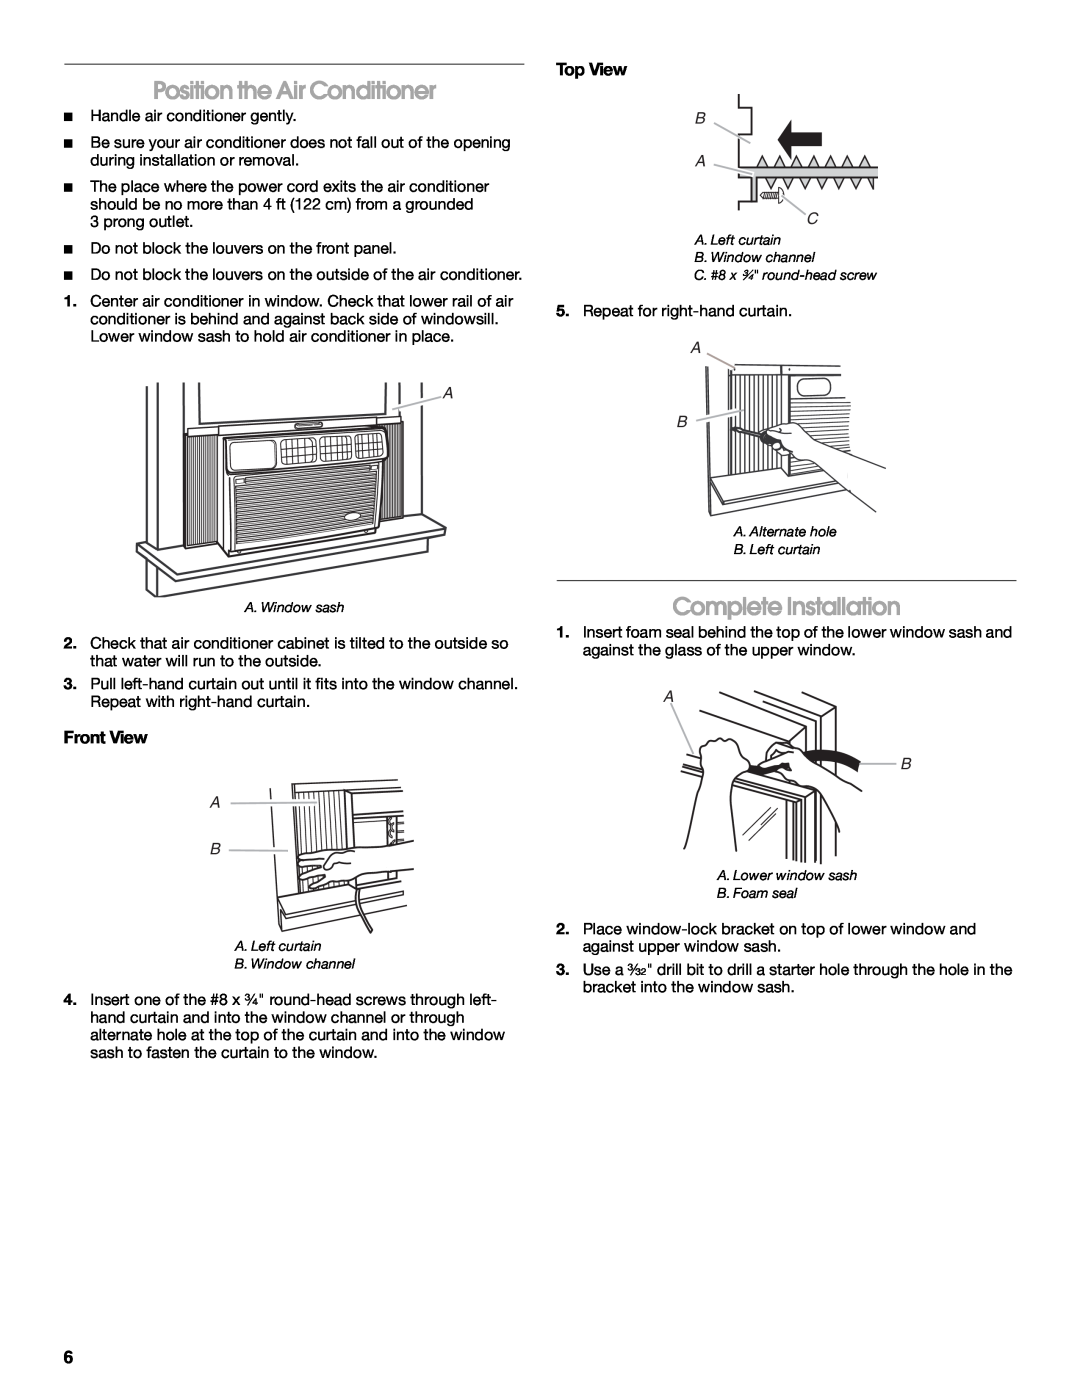 Whirlpool ACM122XR0 manual Position the Air Conditioner, Complete Installation, Front View, Top View, B A C 